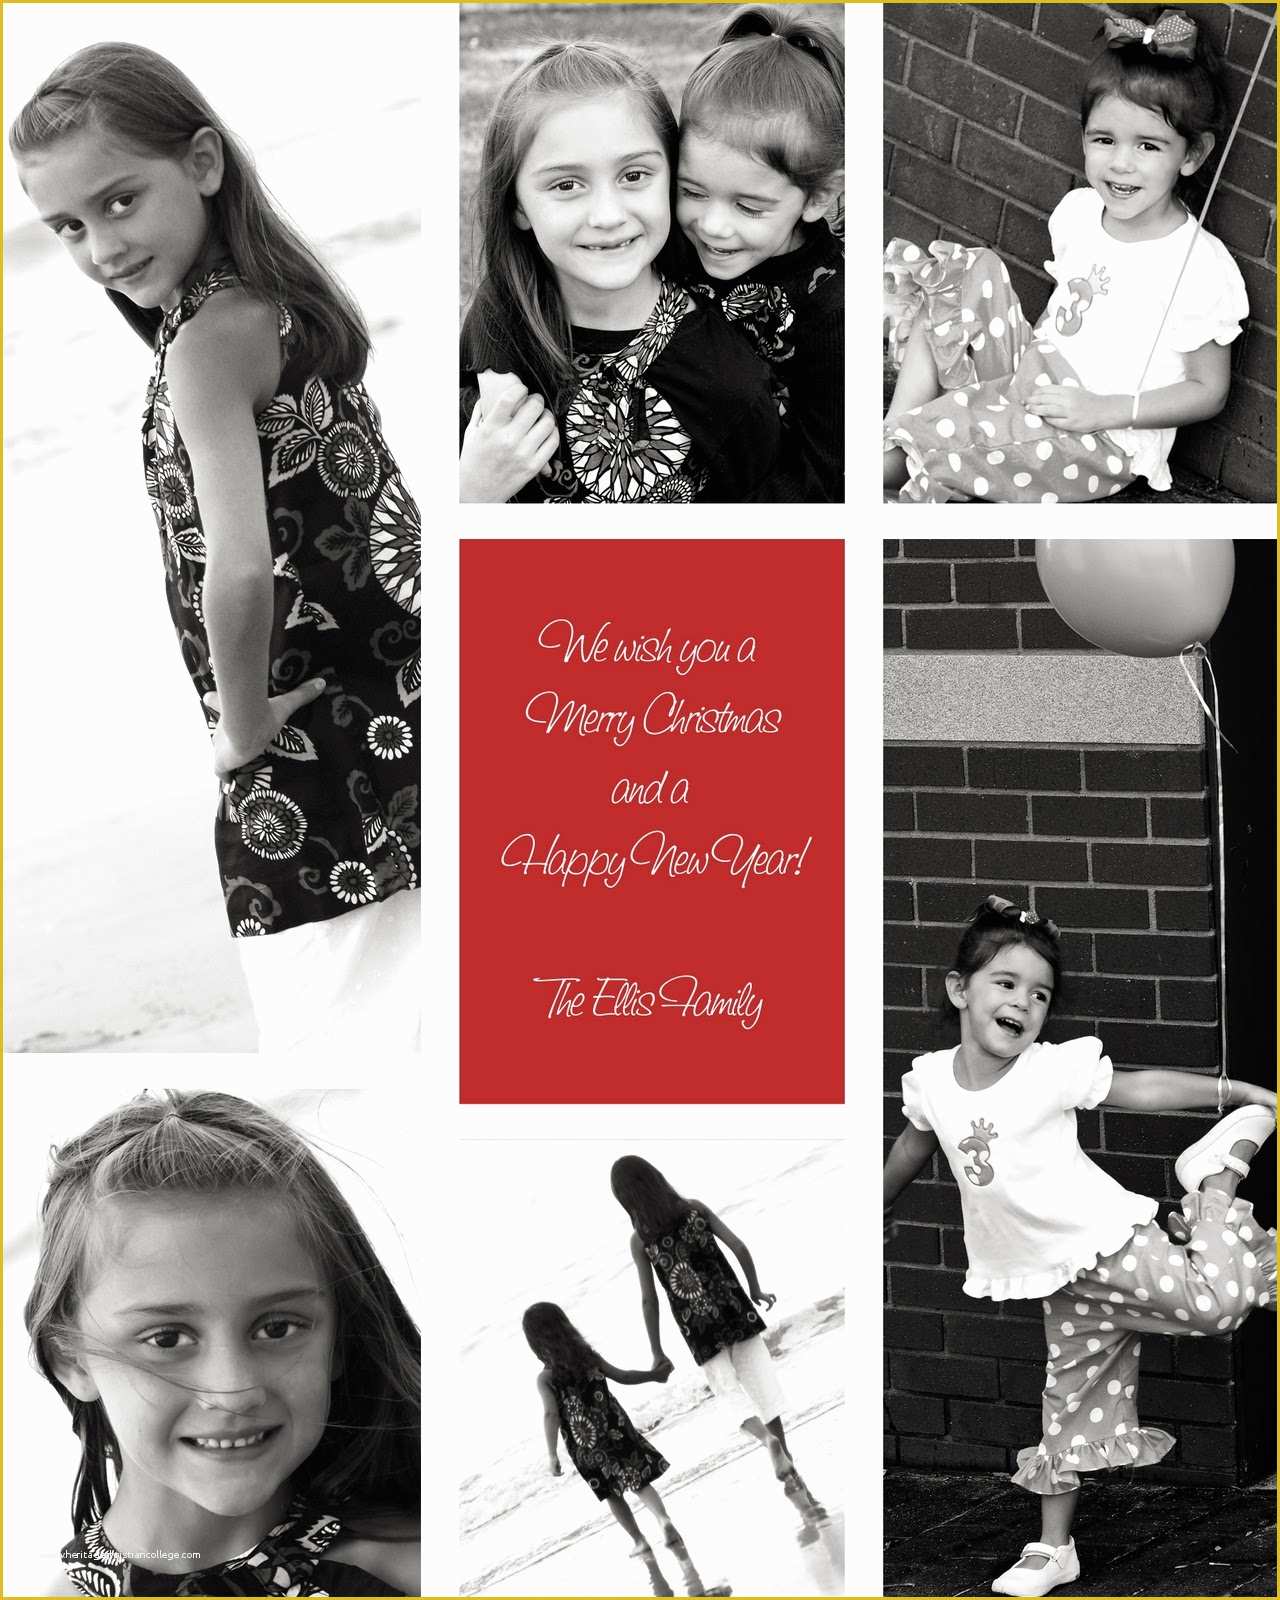 Photoshop Christmas Card Templates Free Download Of Dana Ellis Learning Life S Lessons the Hard Way so You